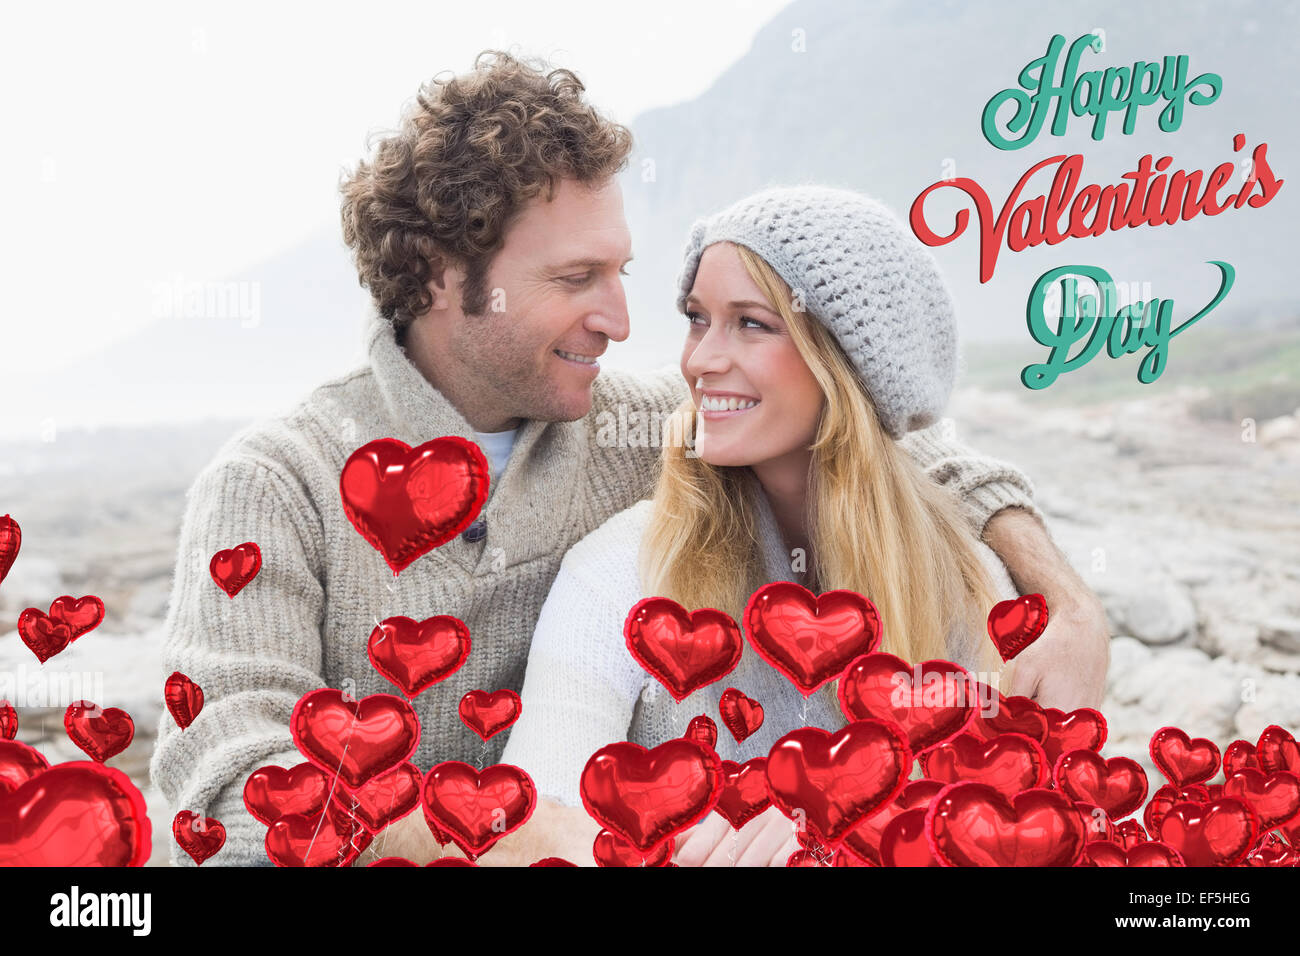 Composite image of happy couple sitting together on rocky landscape Stock Photo